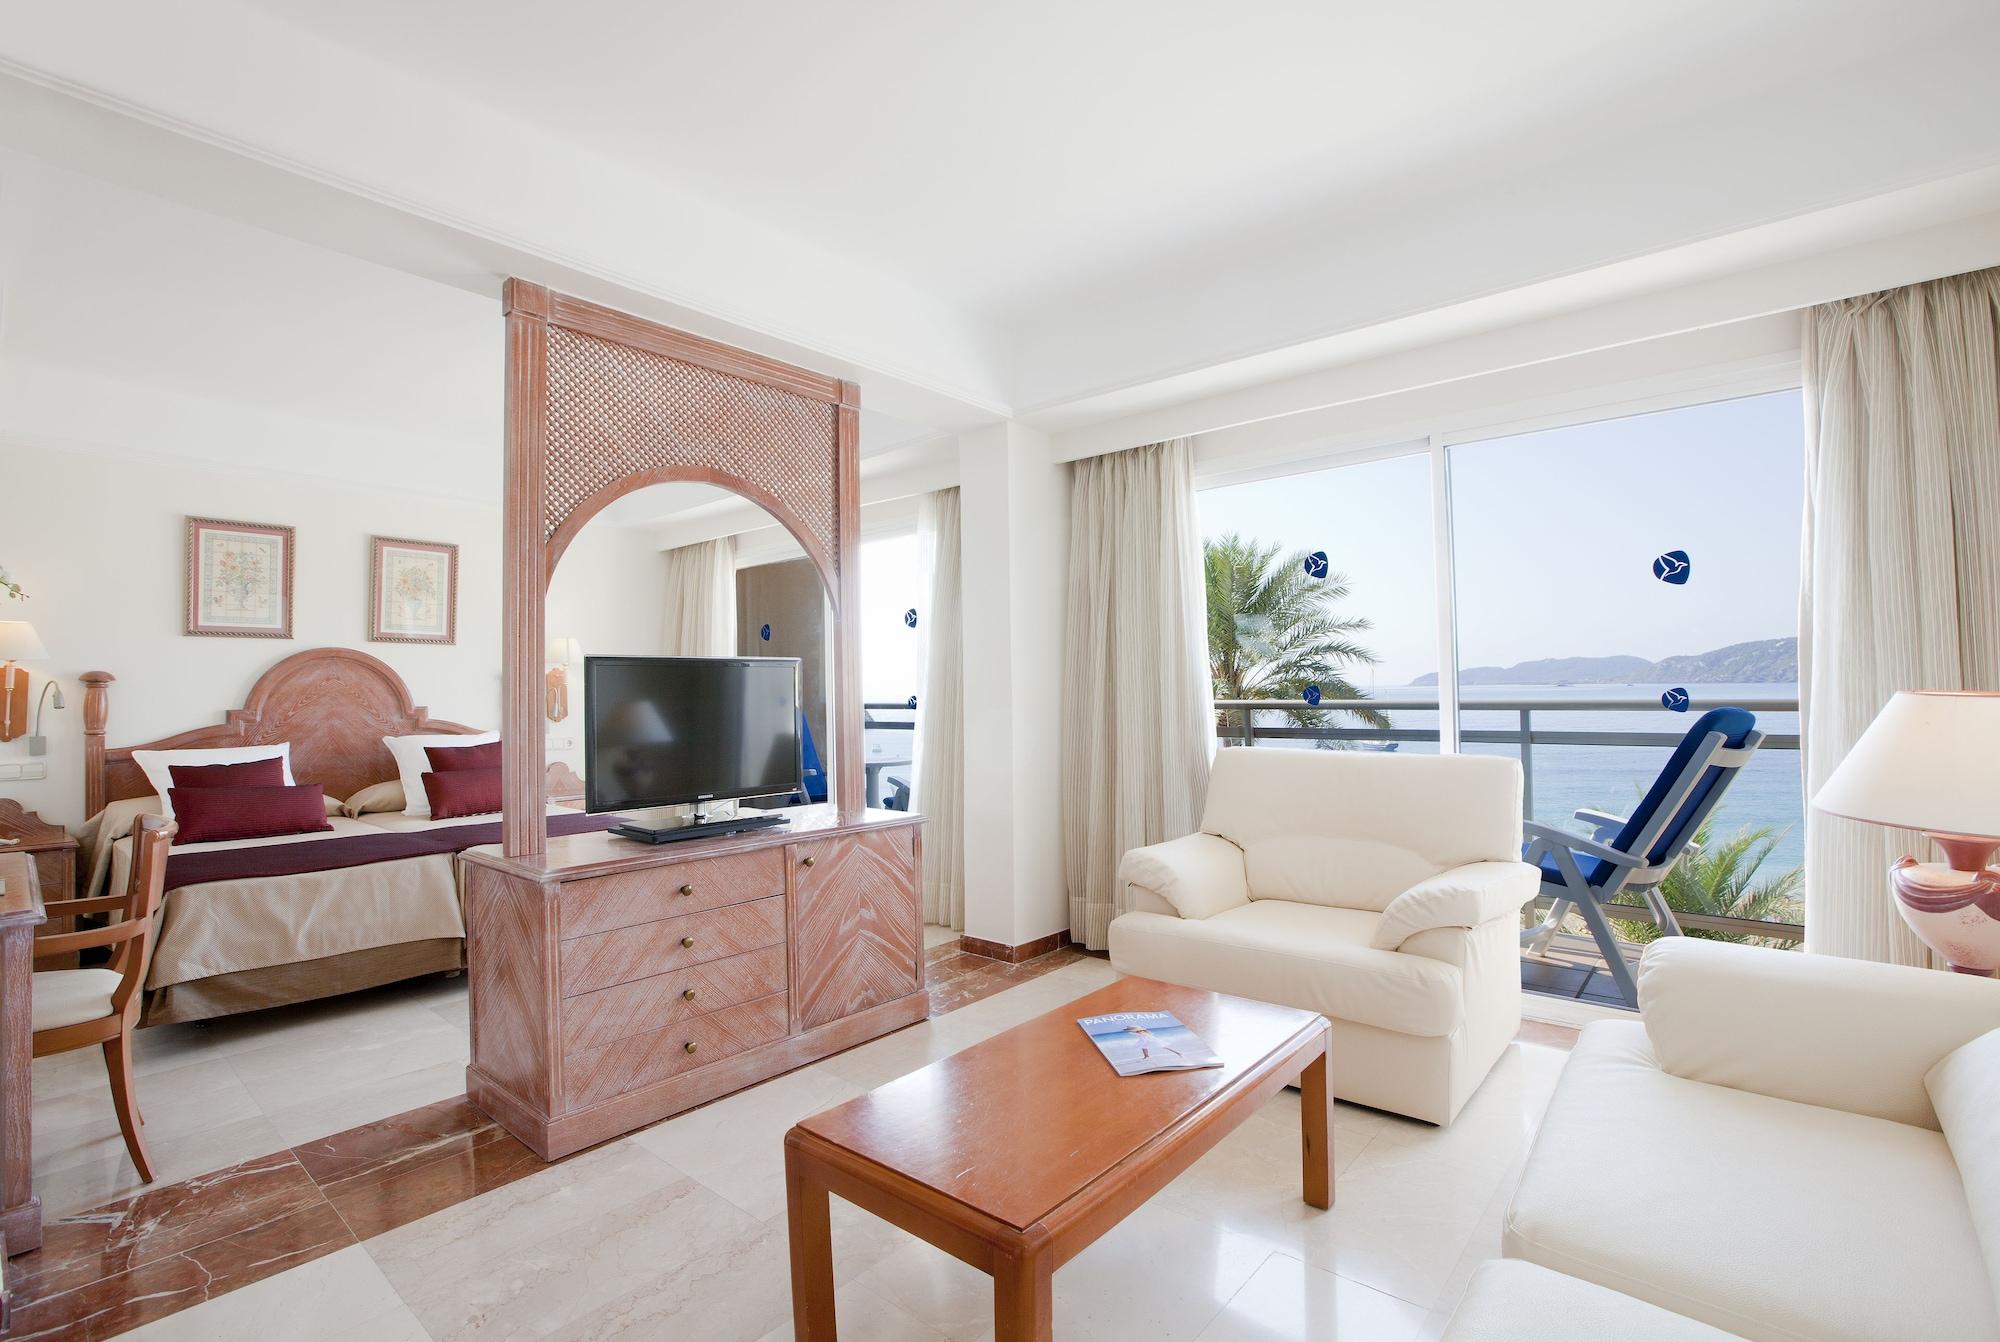 GRUPOTEL CALA SAN VICENTE SANT JOAN DE LABRITJA 5* (Spain) - from US$ 294 |  BOOKED